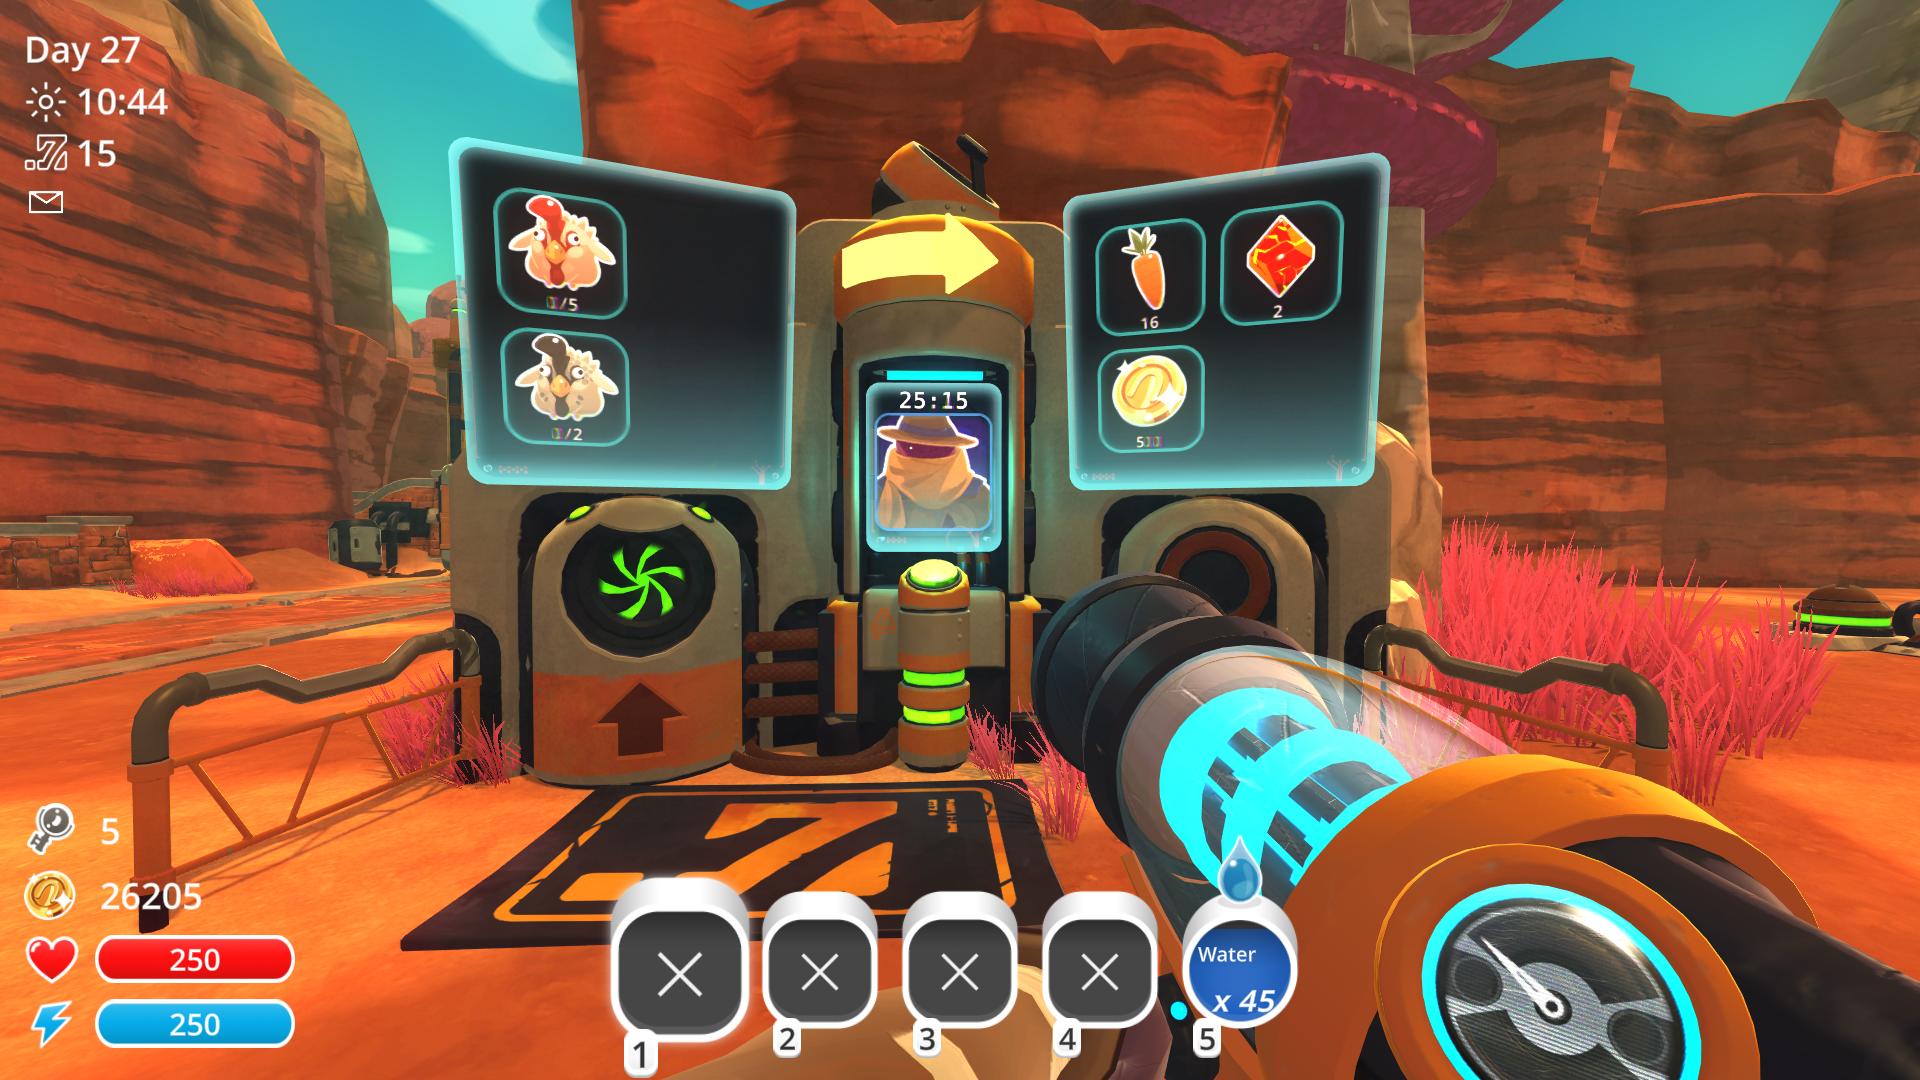 Slime Rancher 2: How to Unlock (& Use) the Market Link